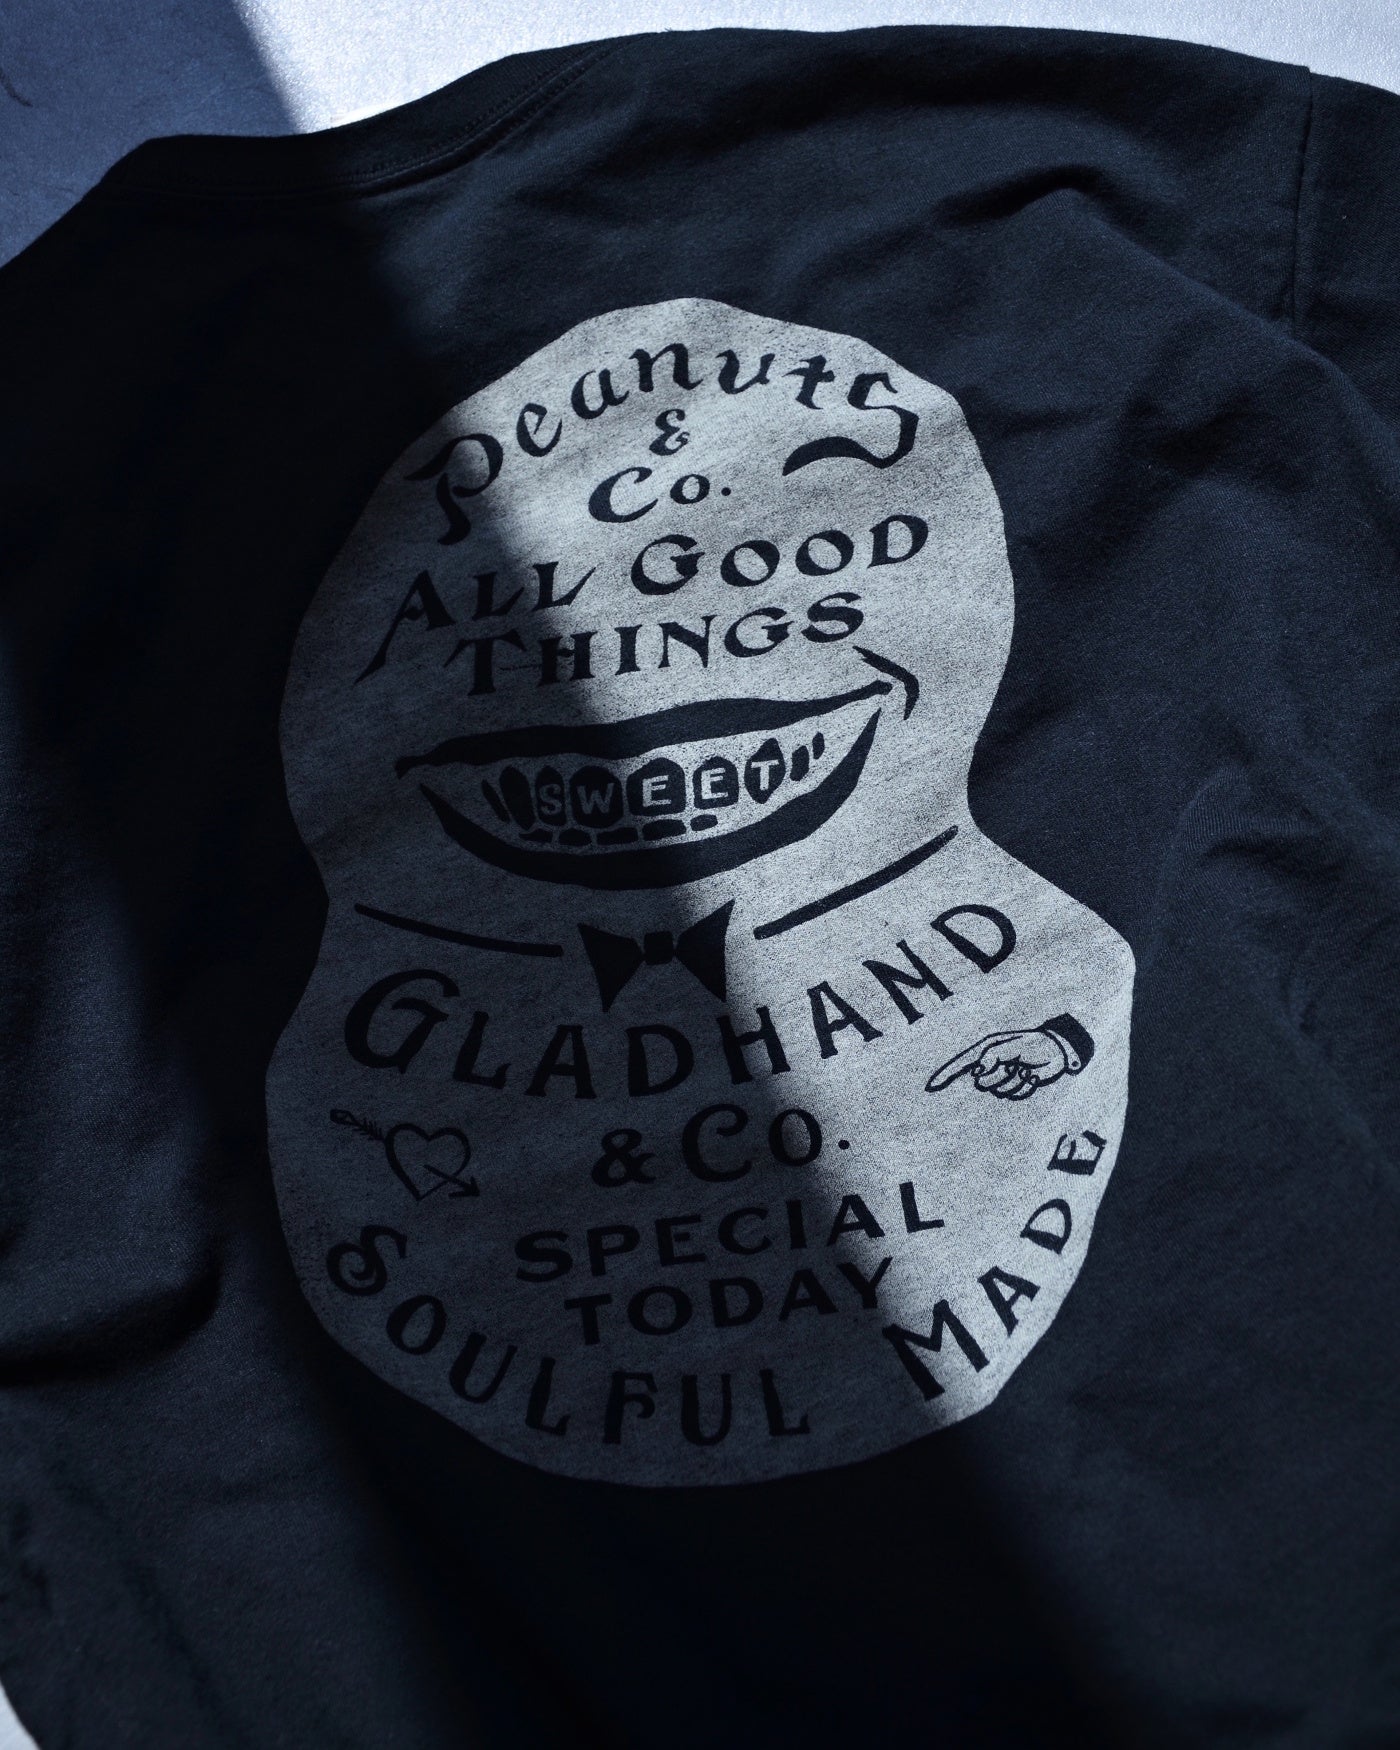 GLADHAND & Co. | Mr. SMILEY - S/S T-SHIRTS - Black